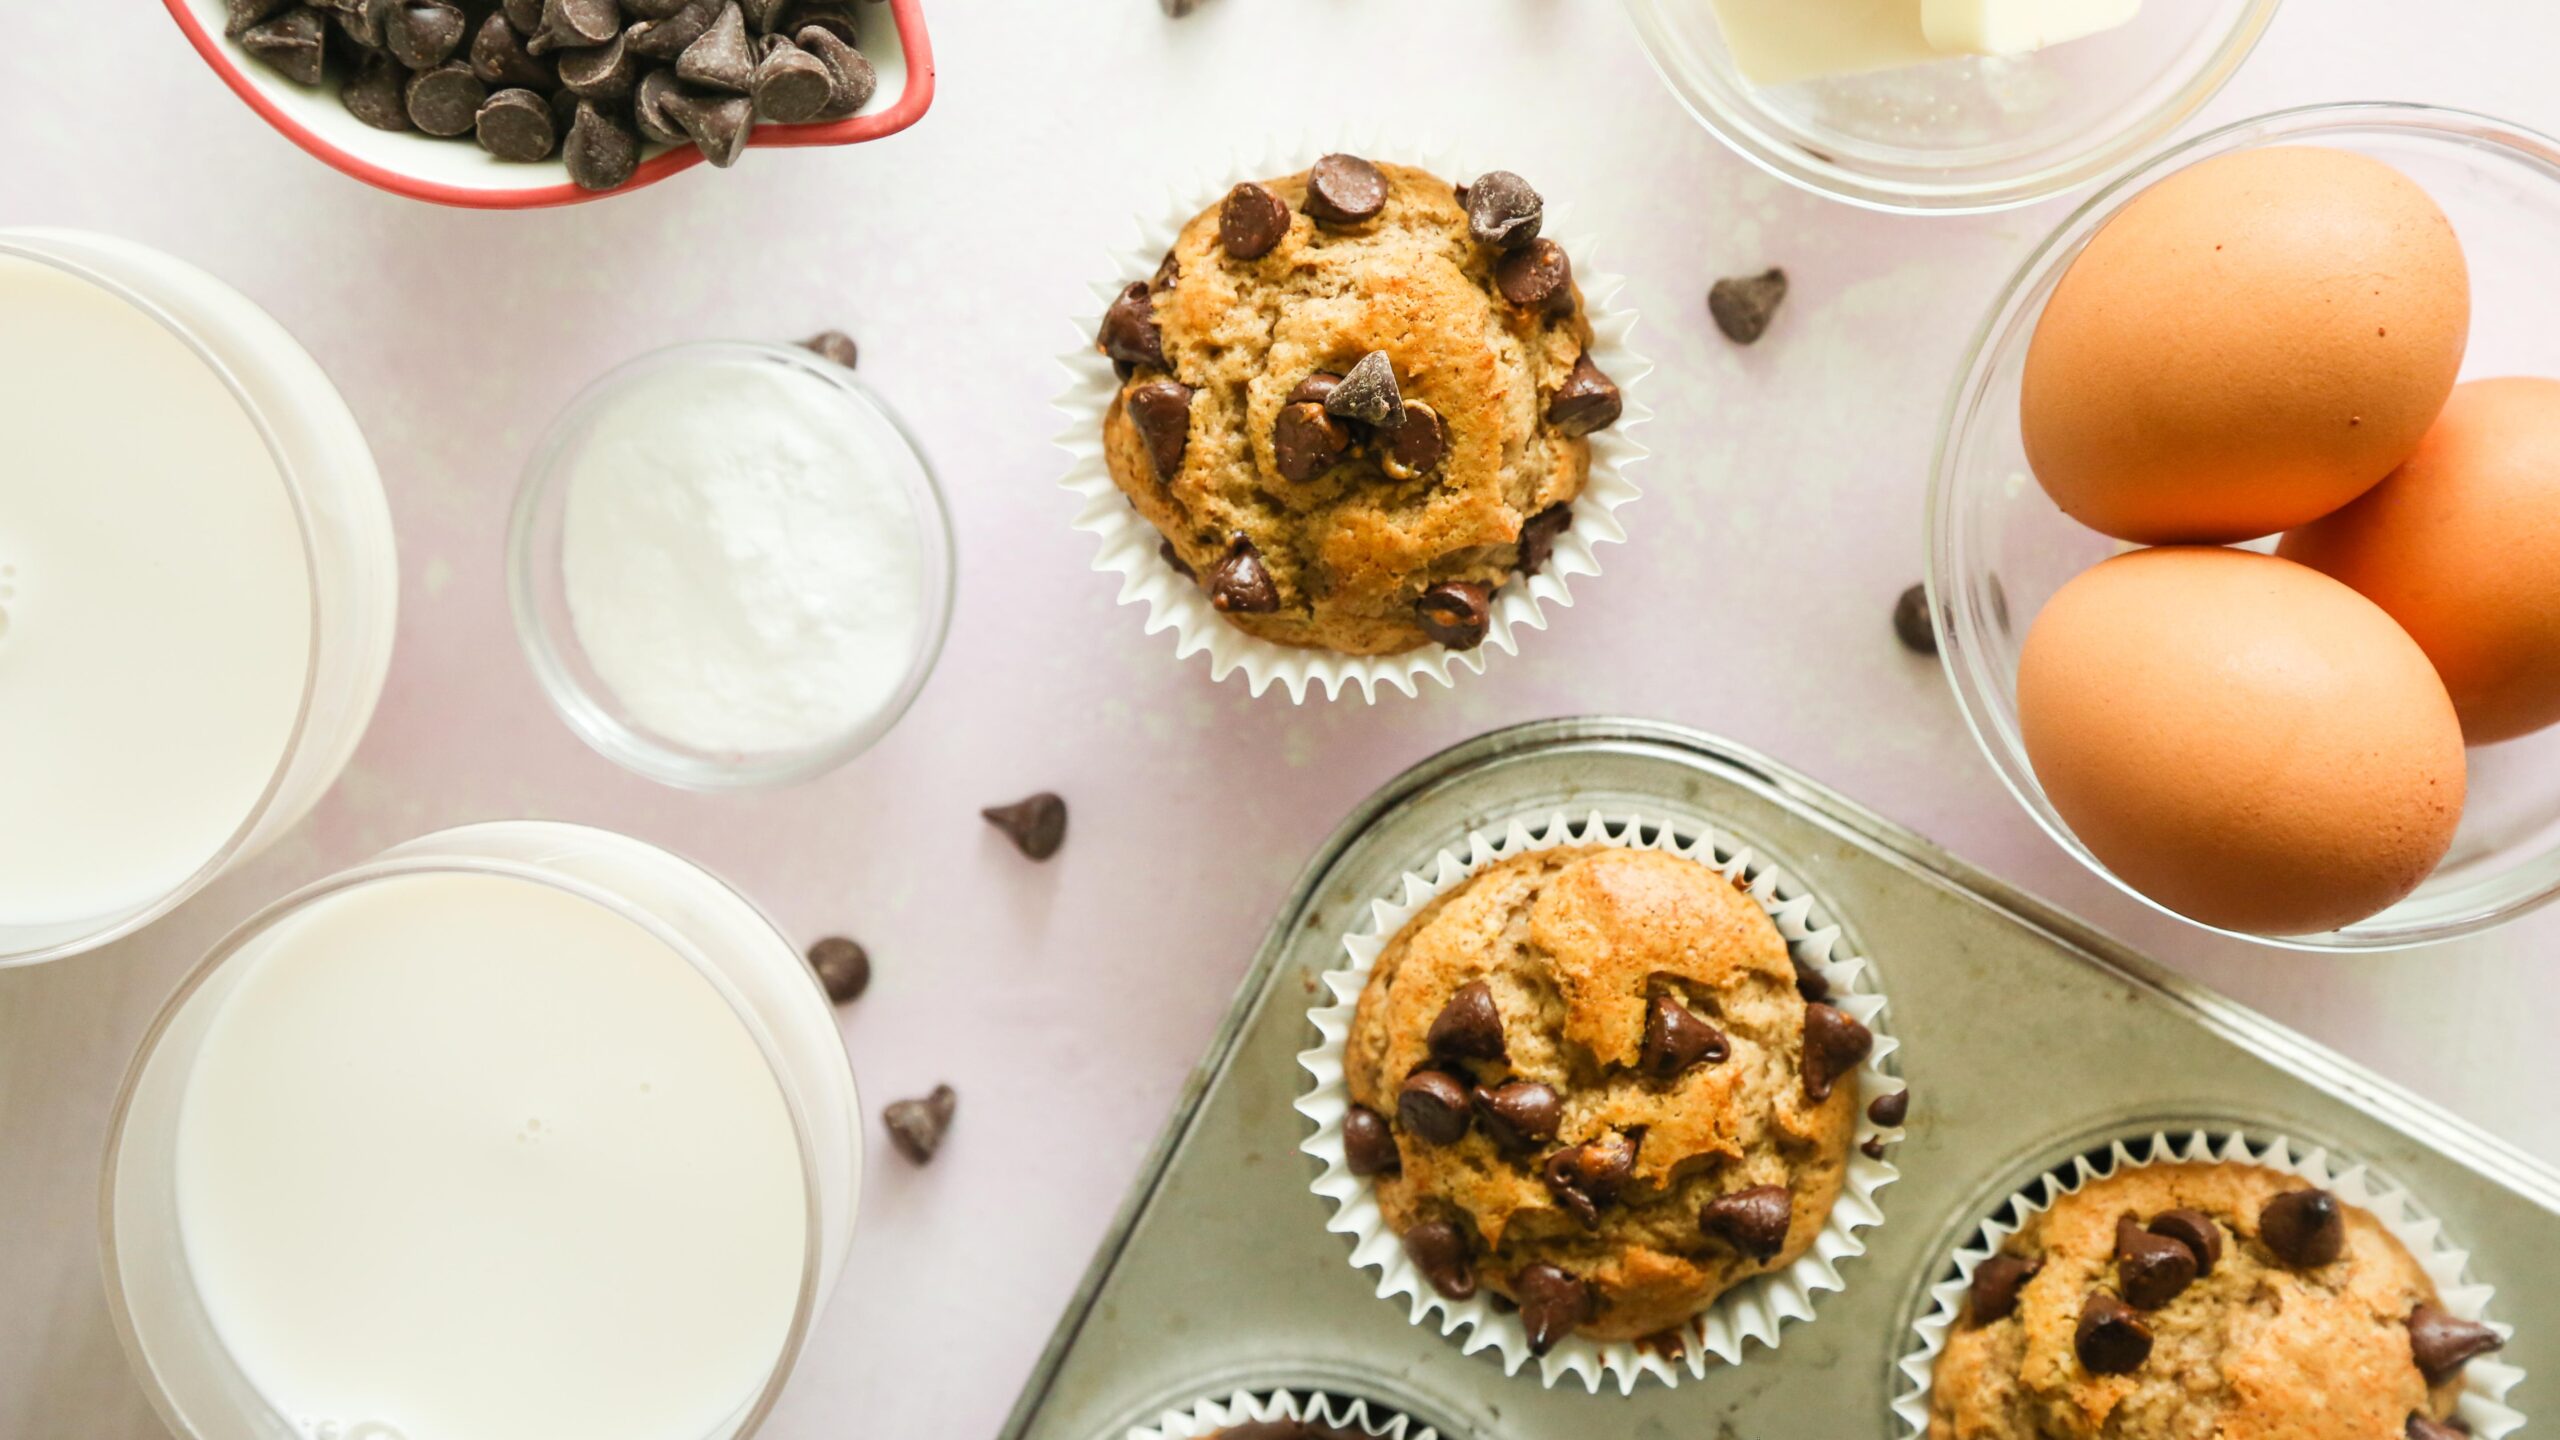  Fuel up your mornings with the perfect coffee-infused muffins